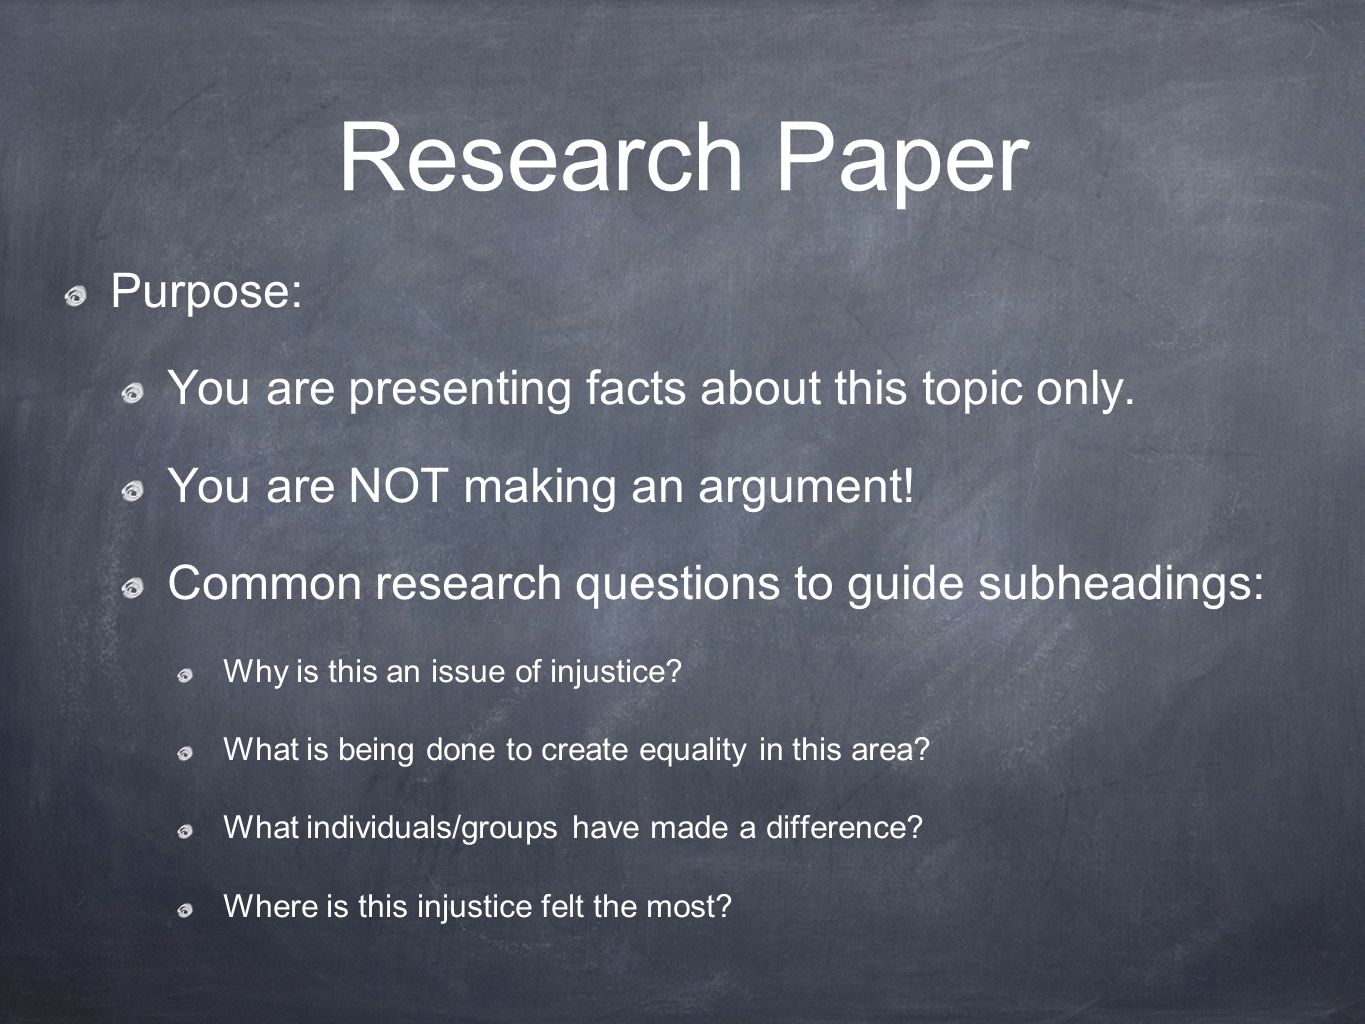 Research Paper Purpose: You are presenting facts about this topic only.